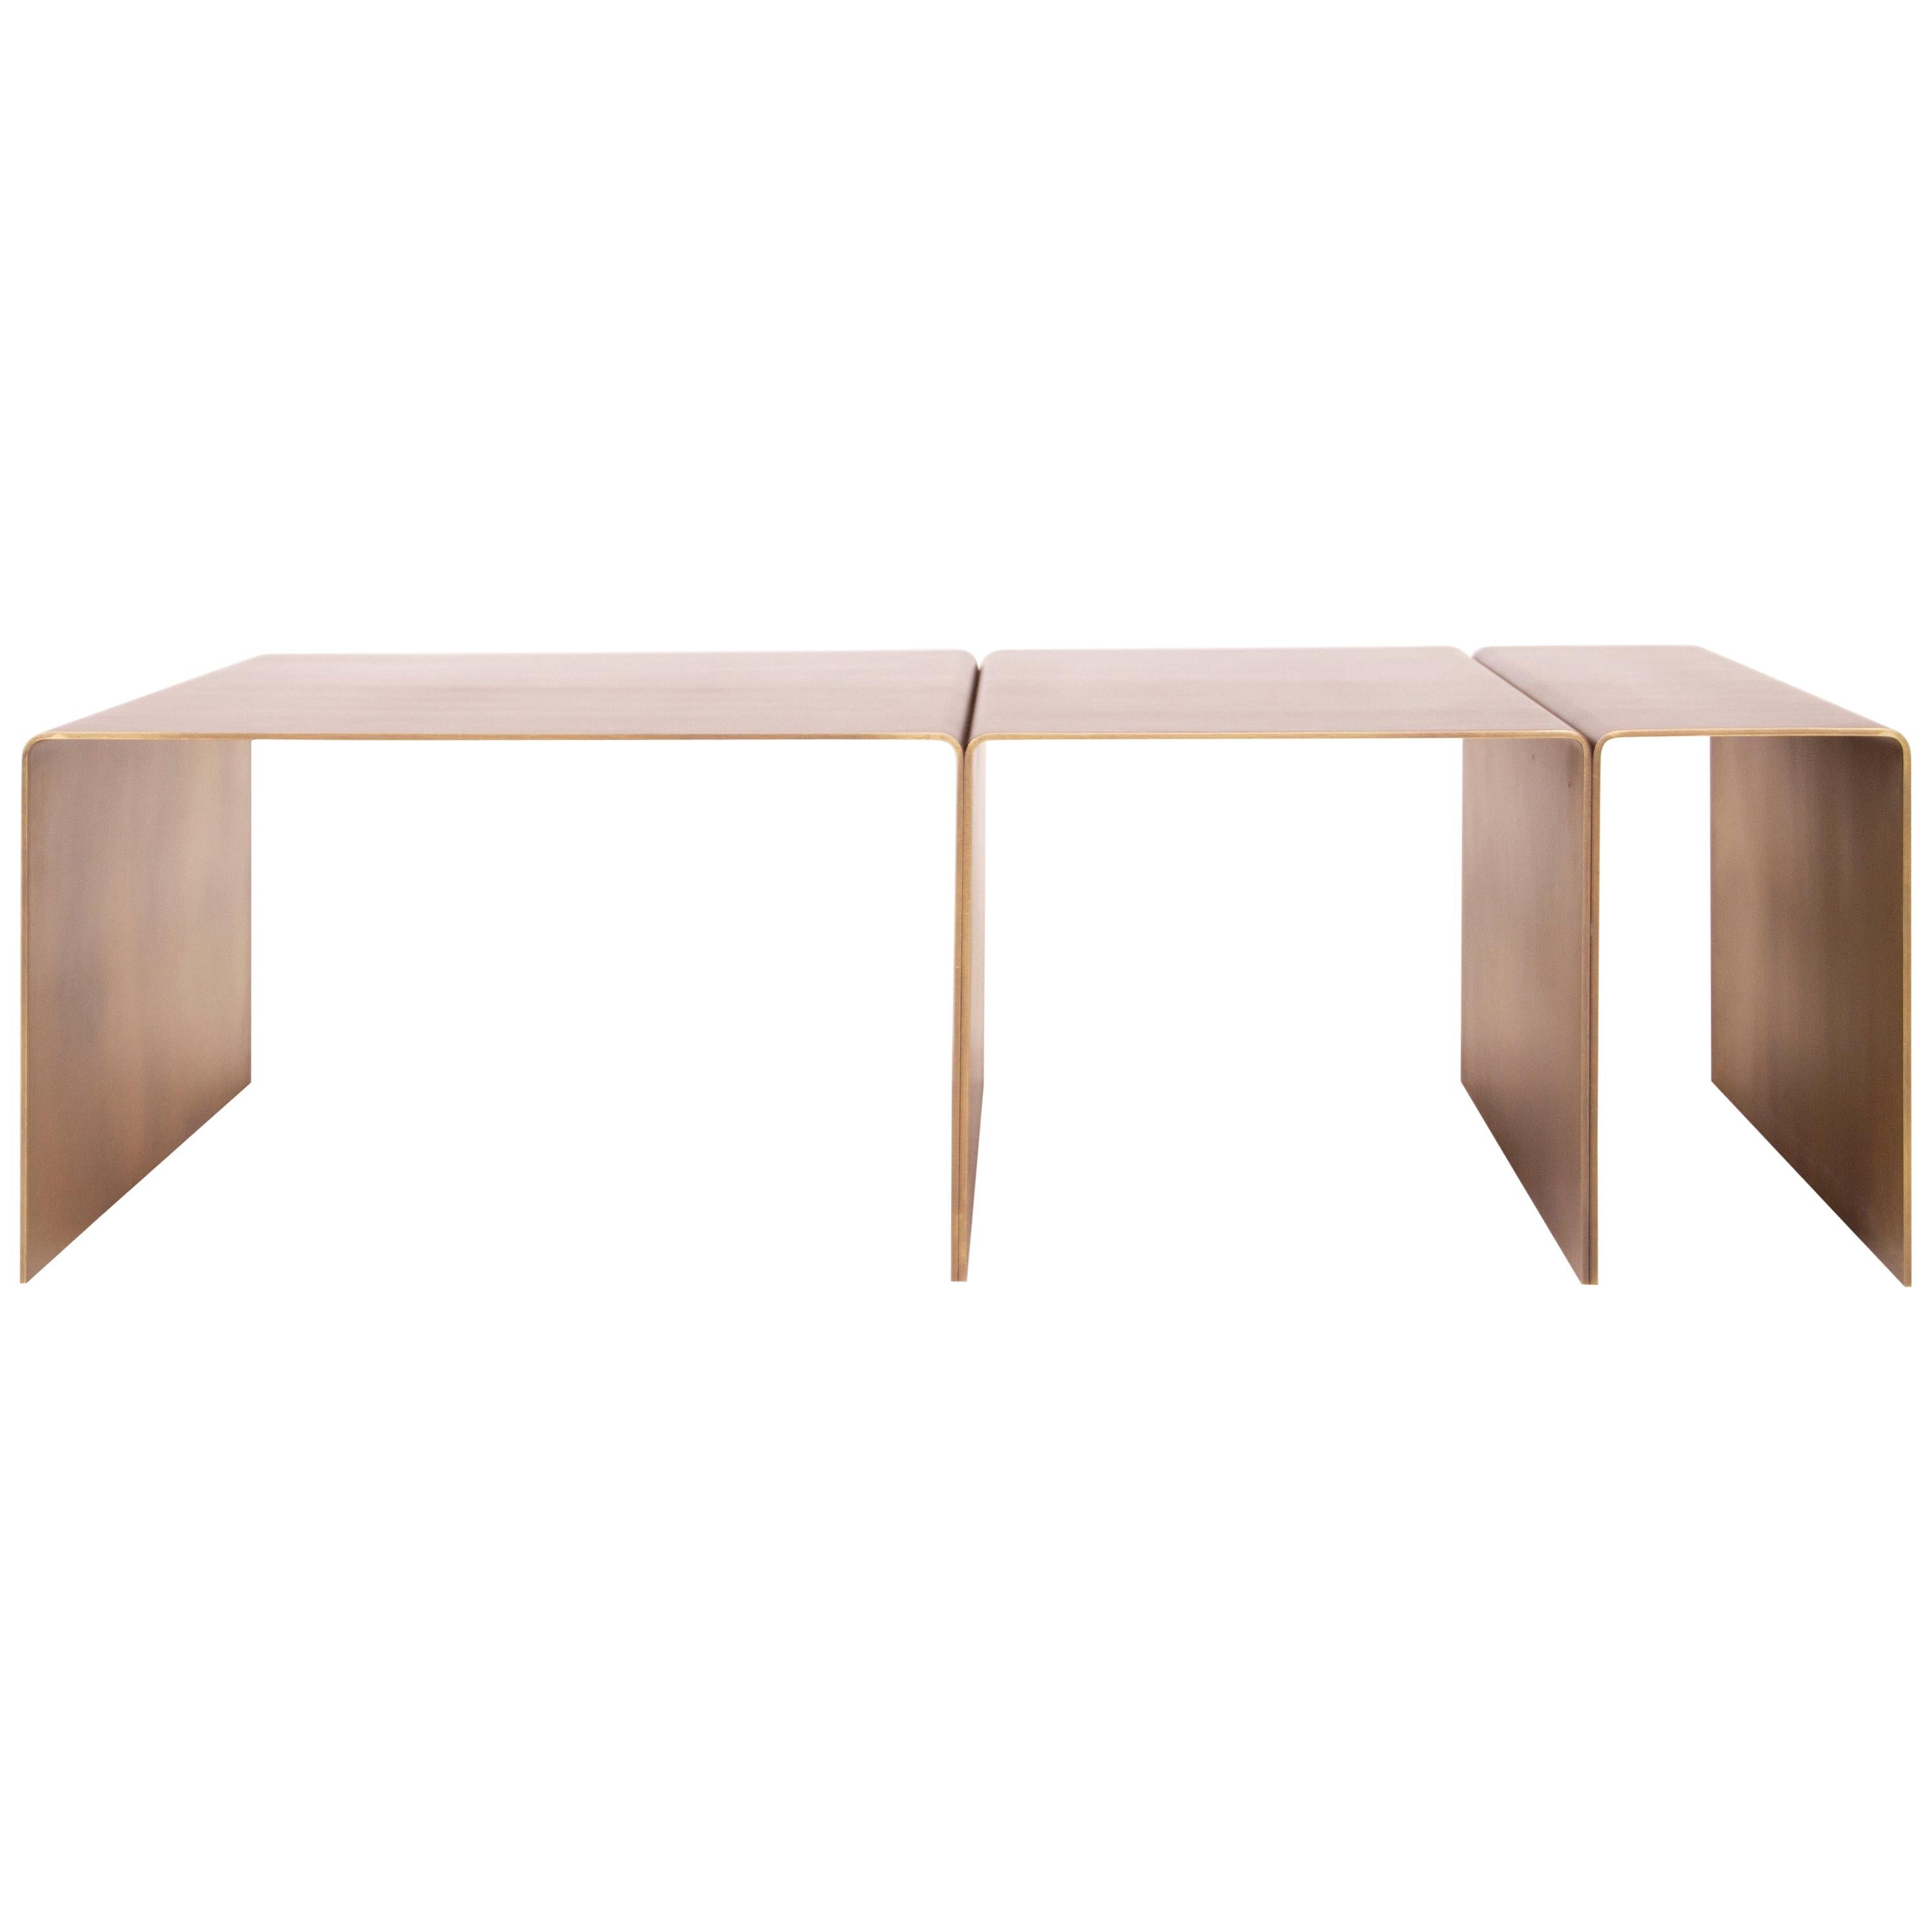 SEGMENT Coffee Table in Burnished Brass by Estudio Persona